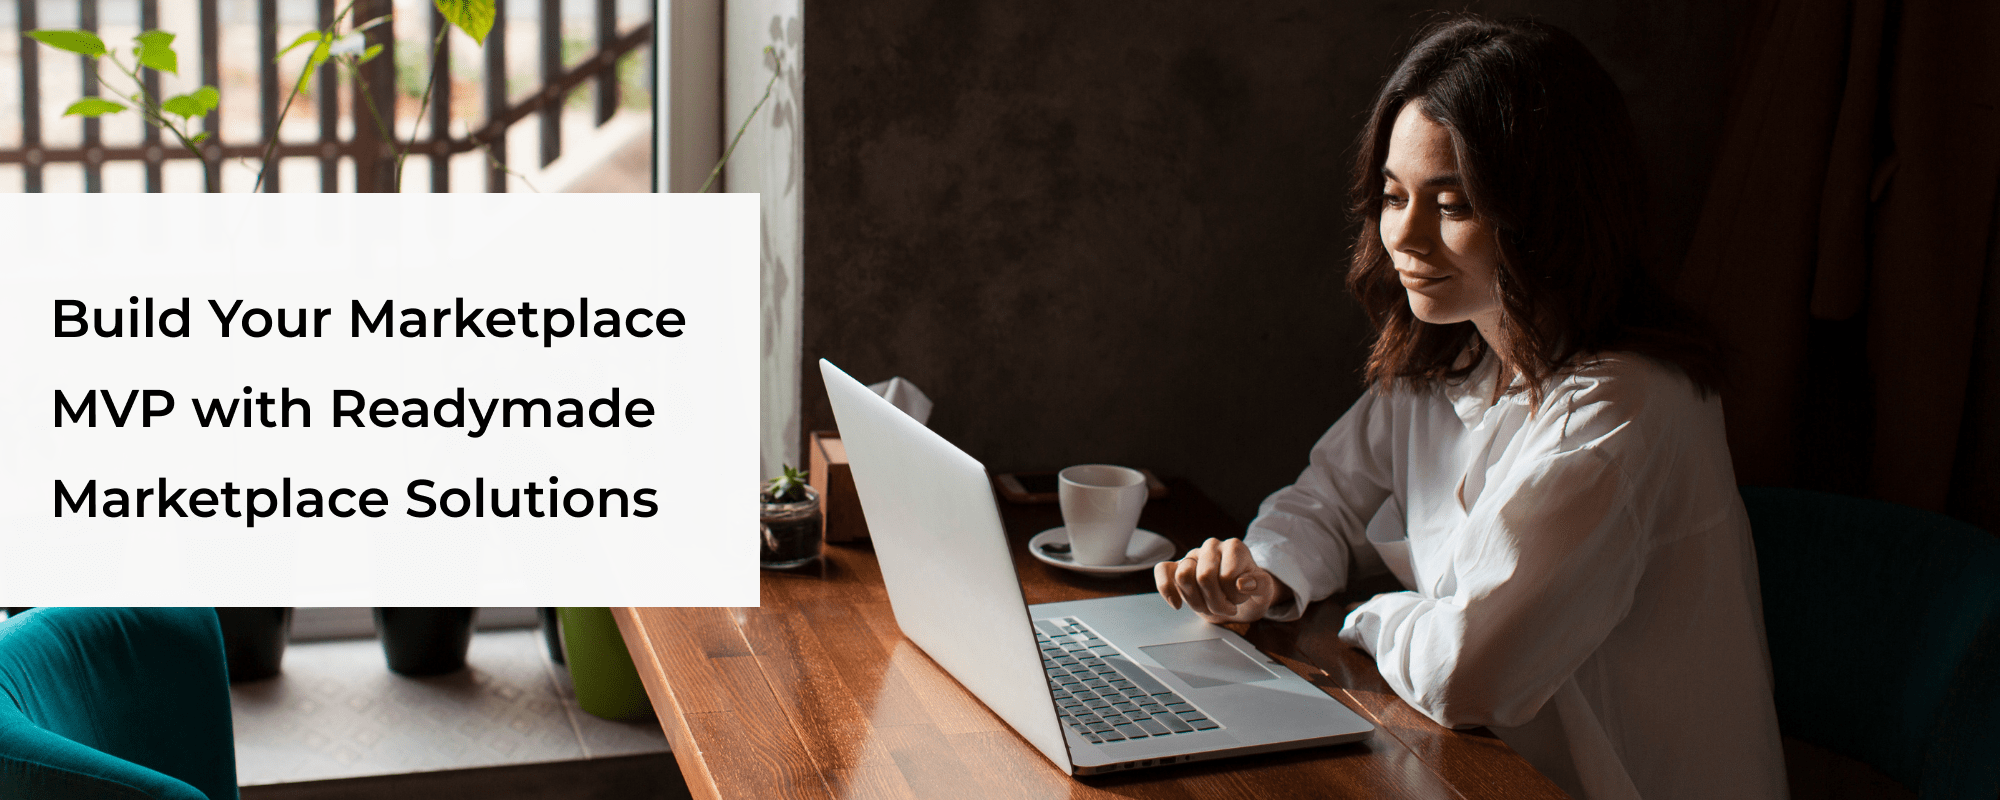 Online Marketplace Solutions for Small Businesses – Build Your Marketplace MVP